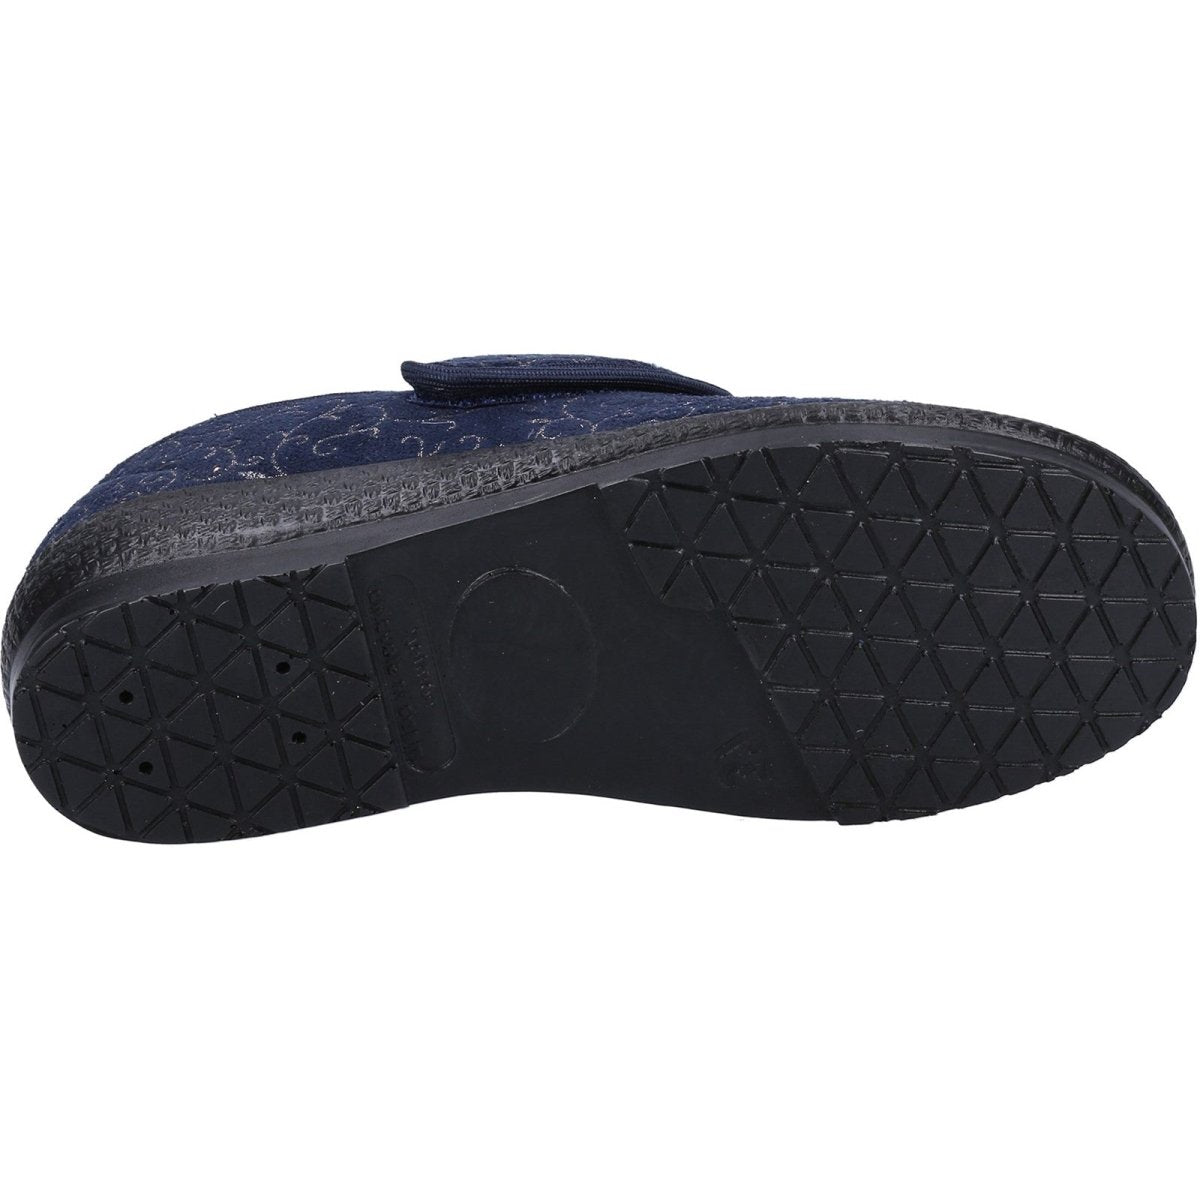 GBS Medical Geraldine Ladies 2E Wide Fit Touch-Fastening Slippers - Shoe Store Direct